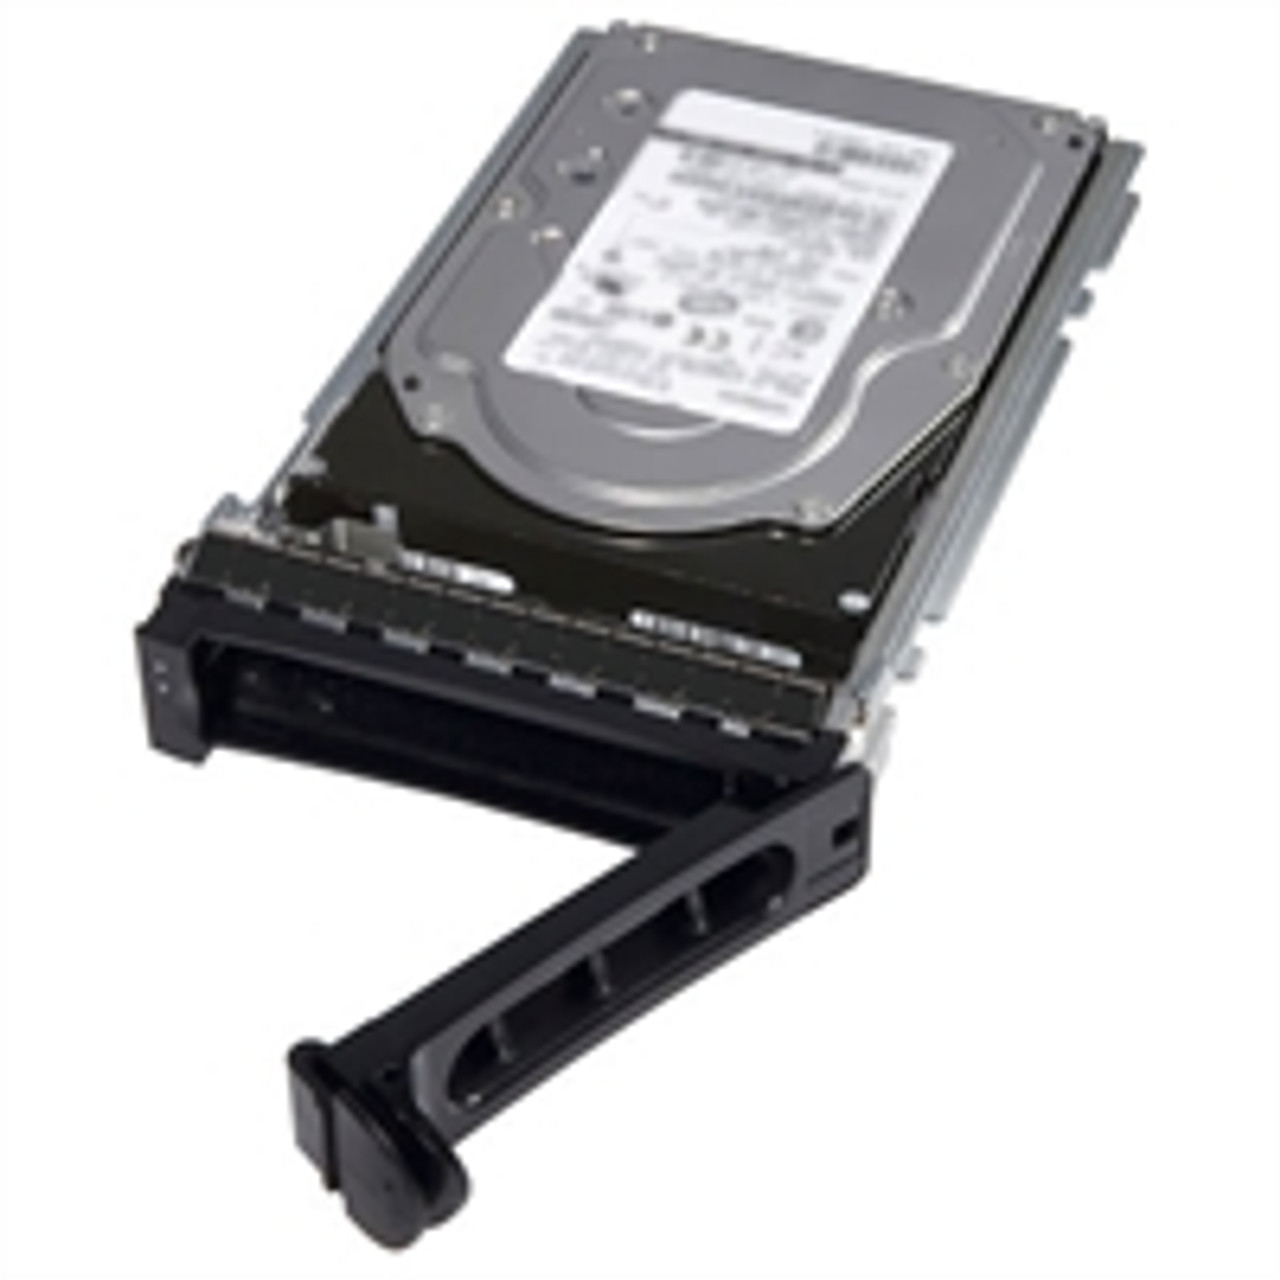 DELL 50XV4 1tb 7200rpm Sata-300 3.5inch Hard Disk Drive With Tray For Poweredge Server